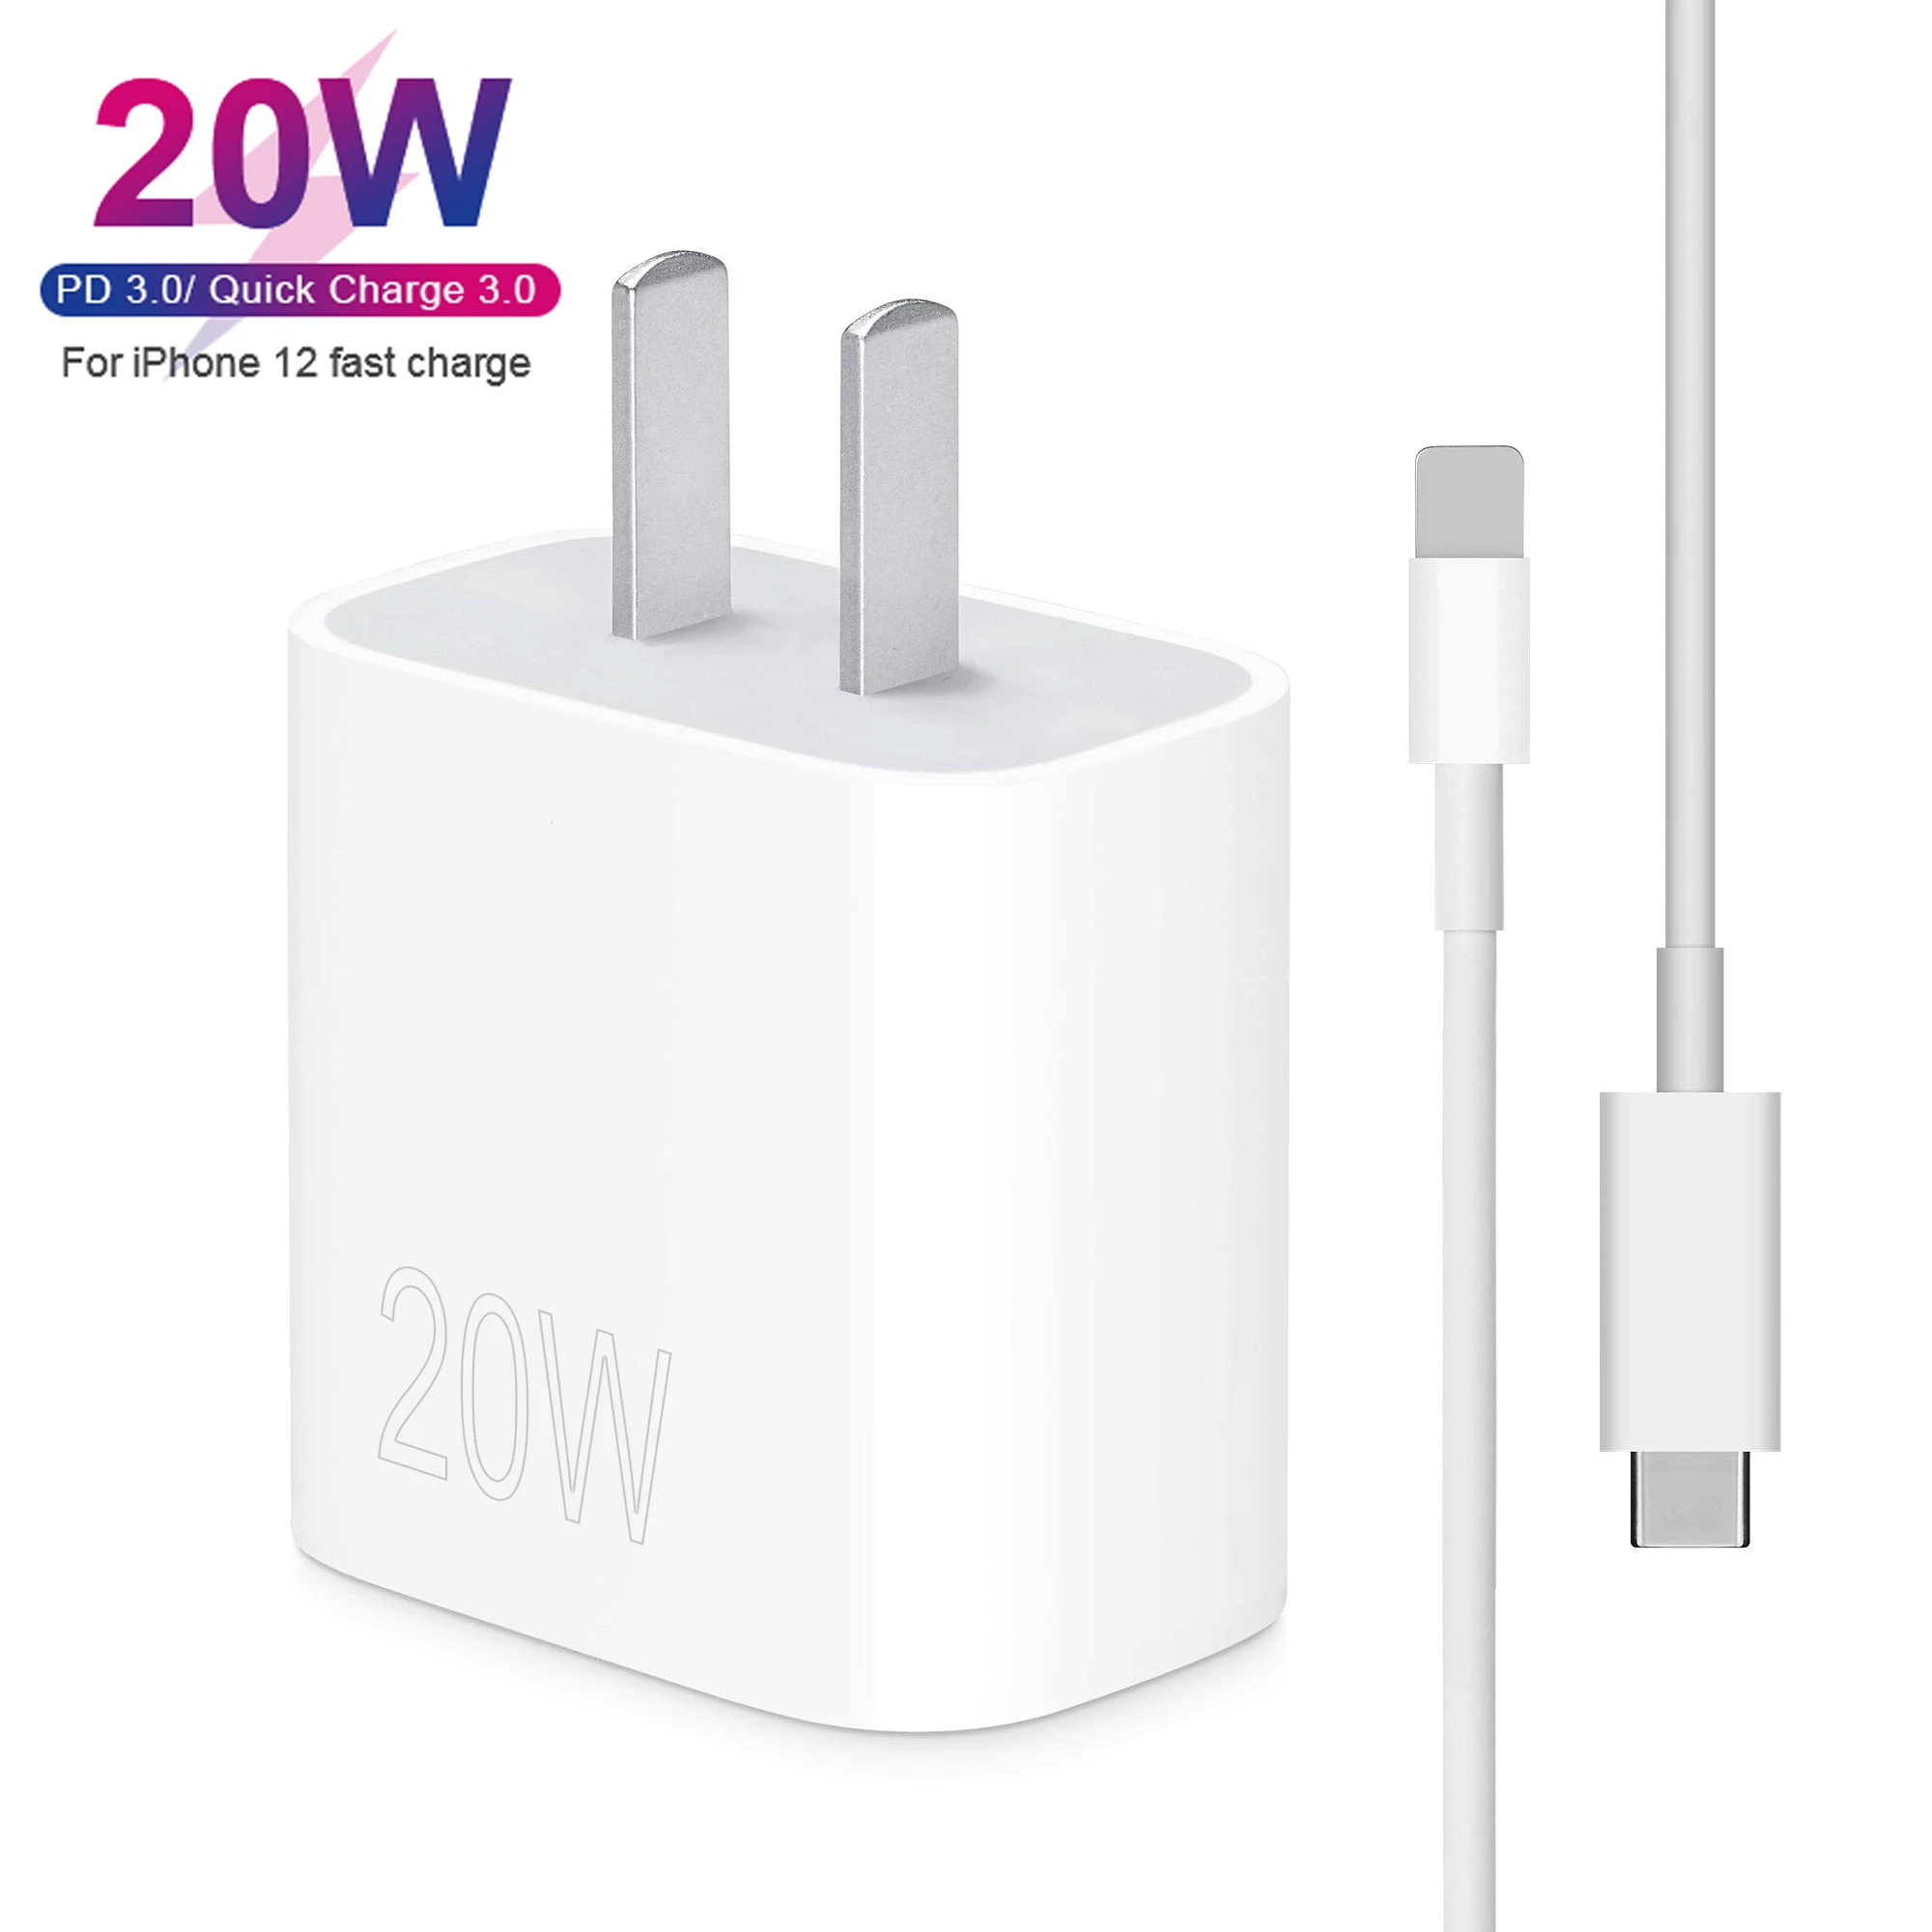 

Charger P20 EU/UK/AU PD 20W USB-C Power Adapter Charging Station Fast Usb Portable Charger For iphone 12, White black